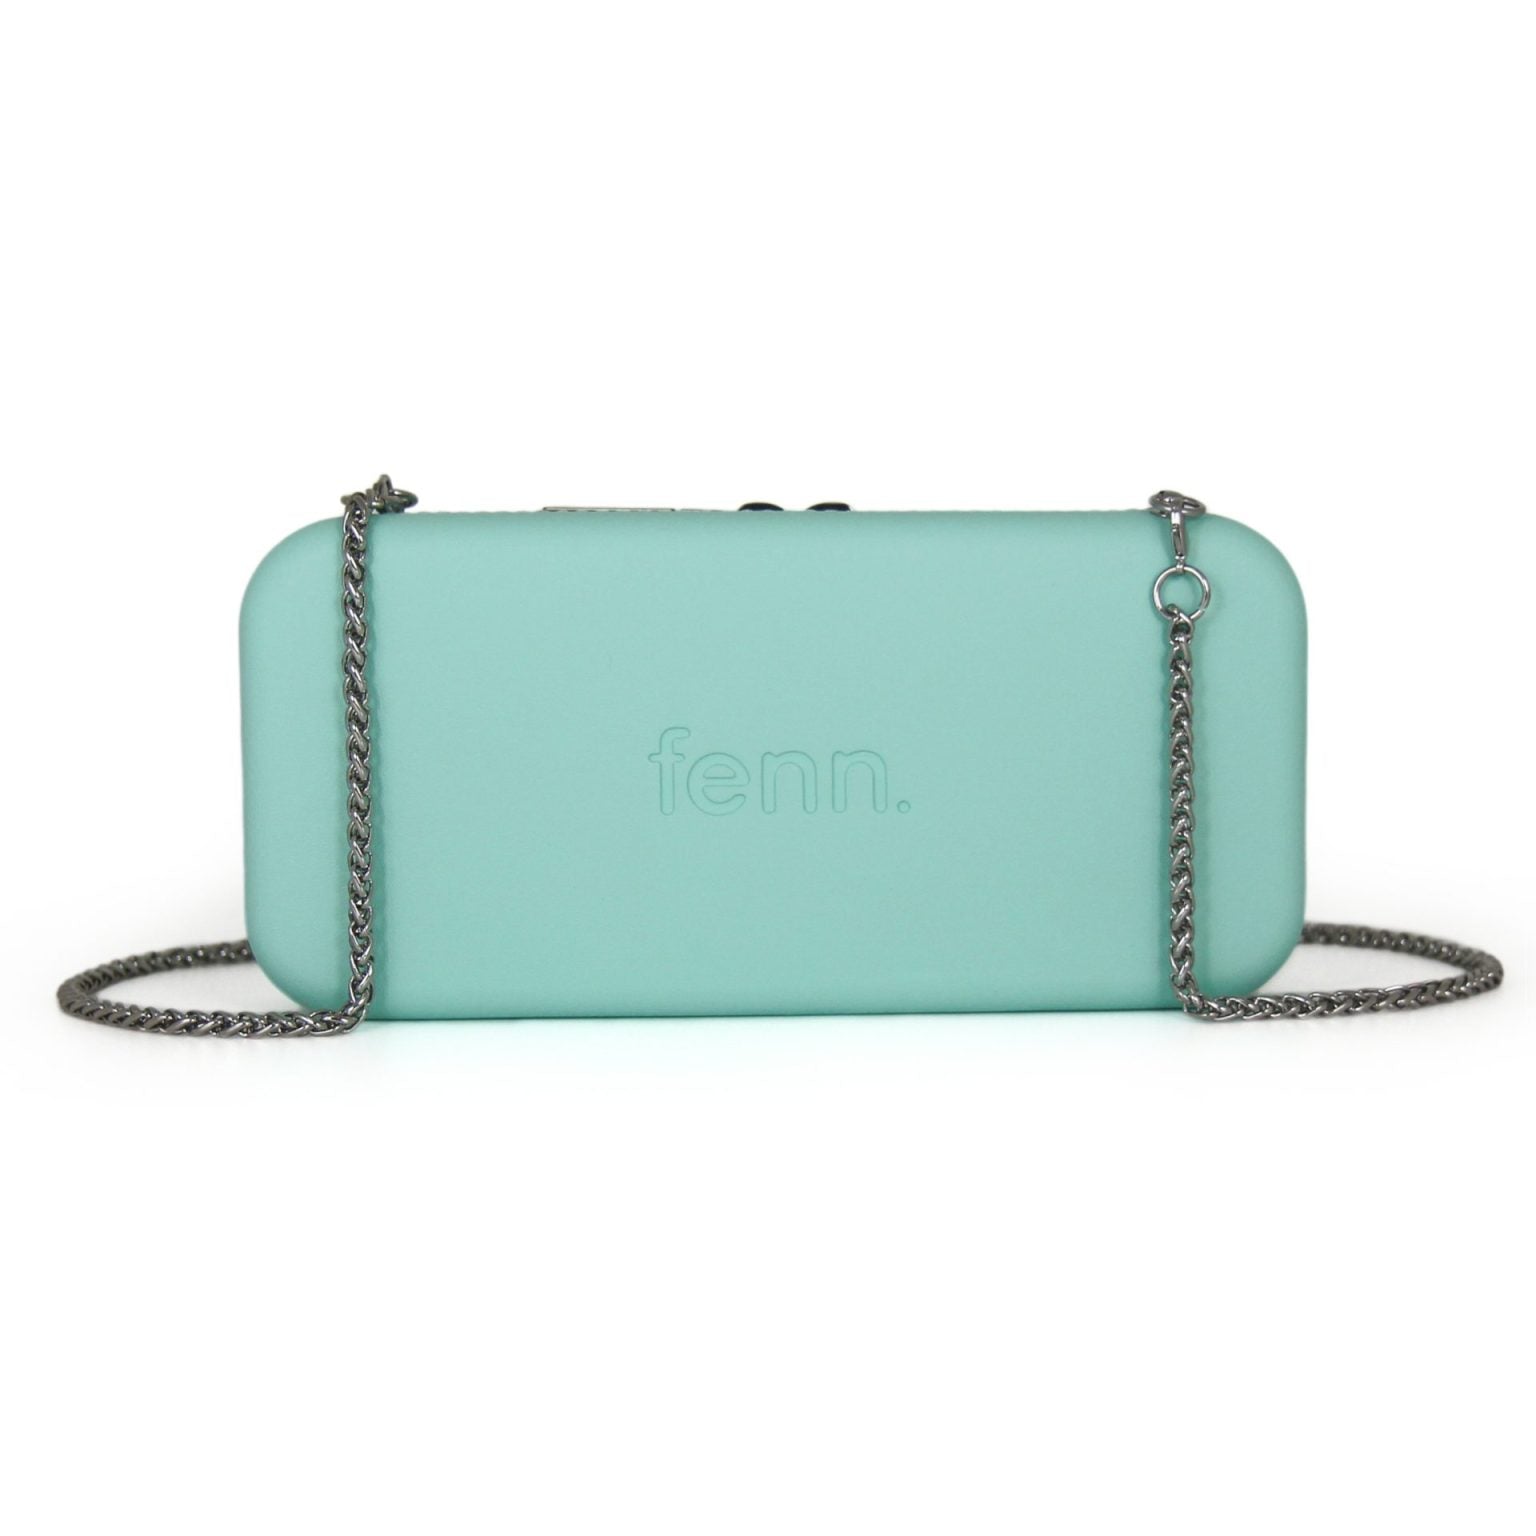 TURQUOISE purse with silver chain strap